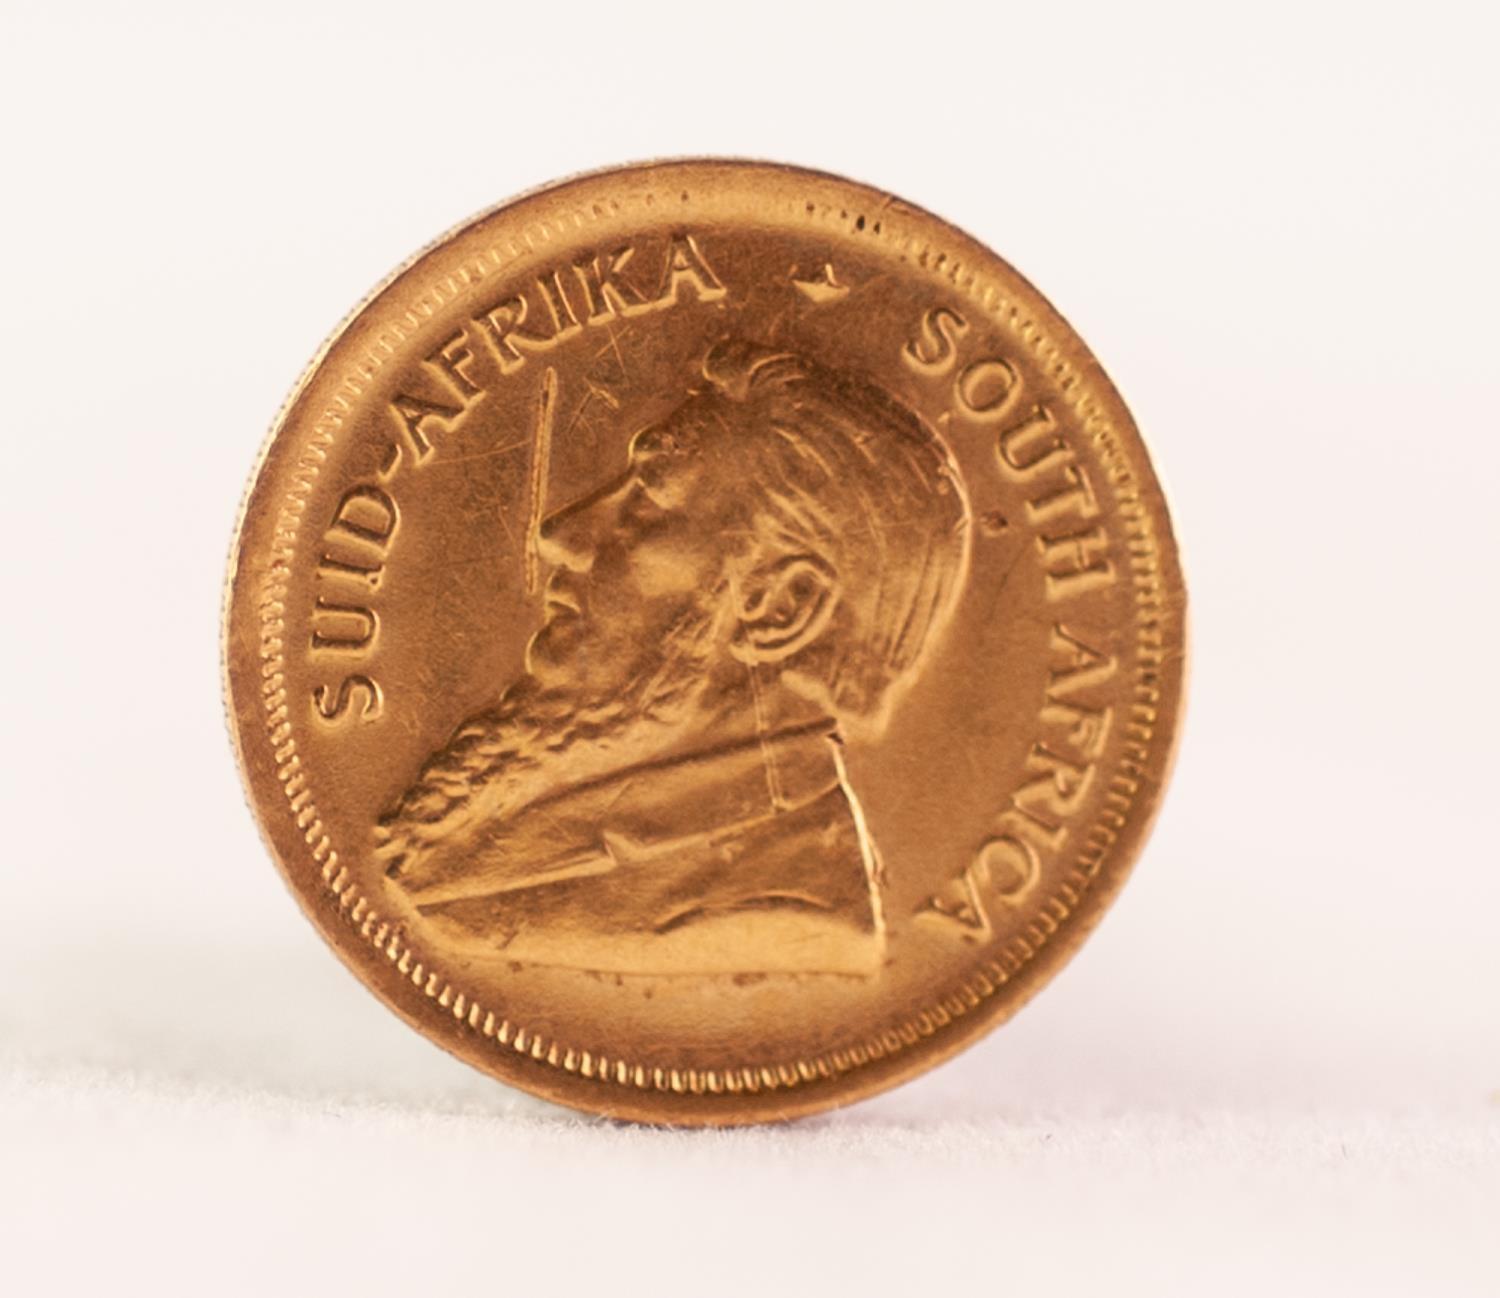 SOUTH AFRICAN FINE GOLD 1/10th OF AN OZ KRUGERAND, 1981, approximately 3.4gms